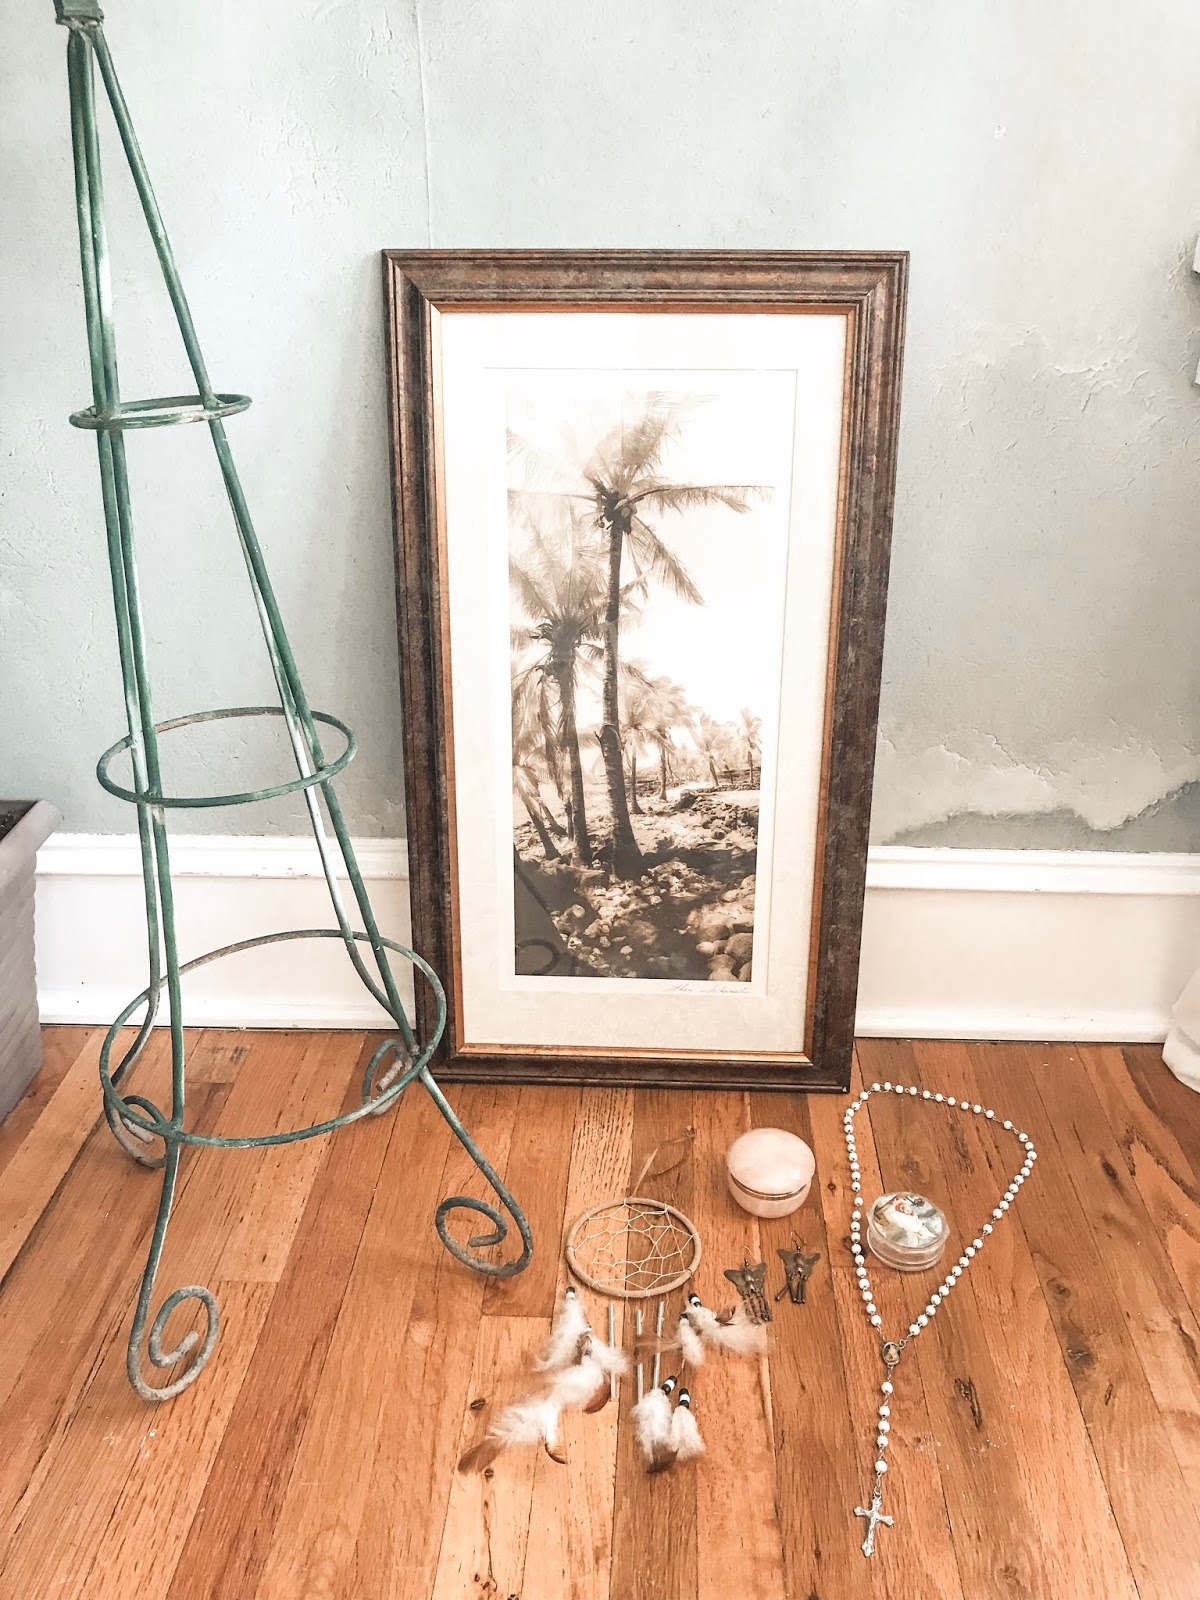 Yard Sale Finds and where I placed them in our Home - Part 2